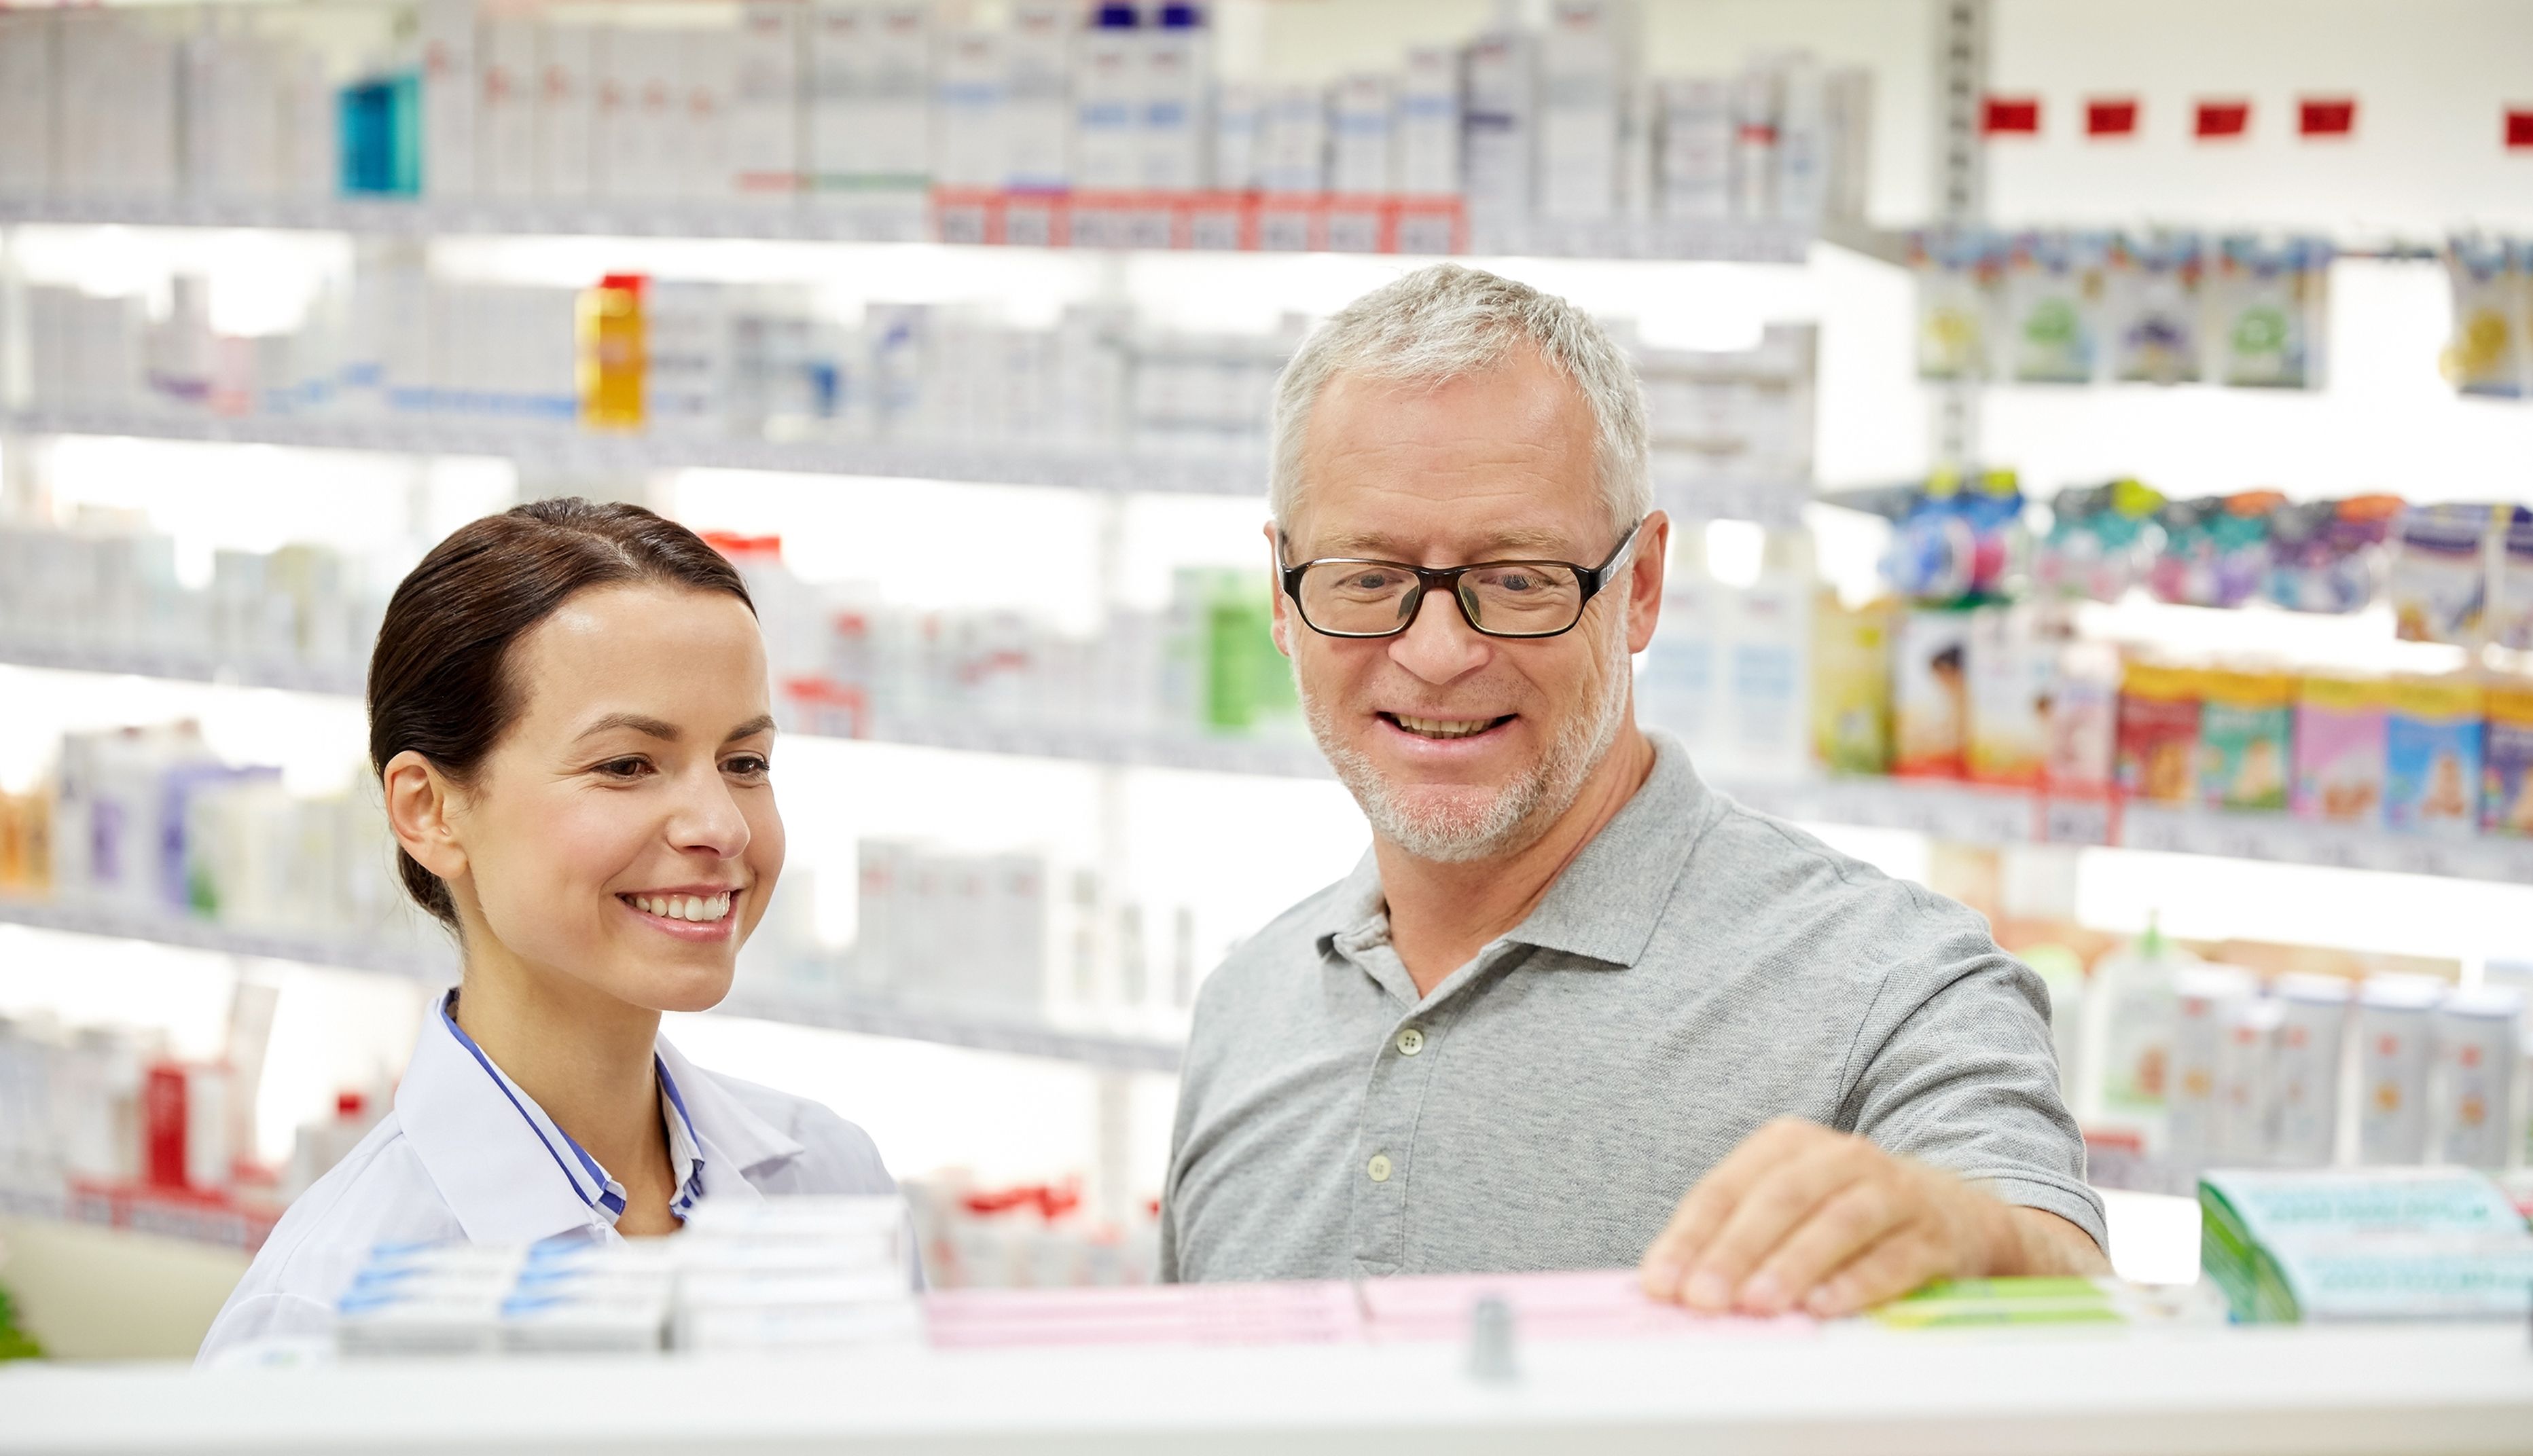 Pharmacist and Patient Smiling